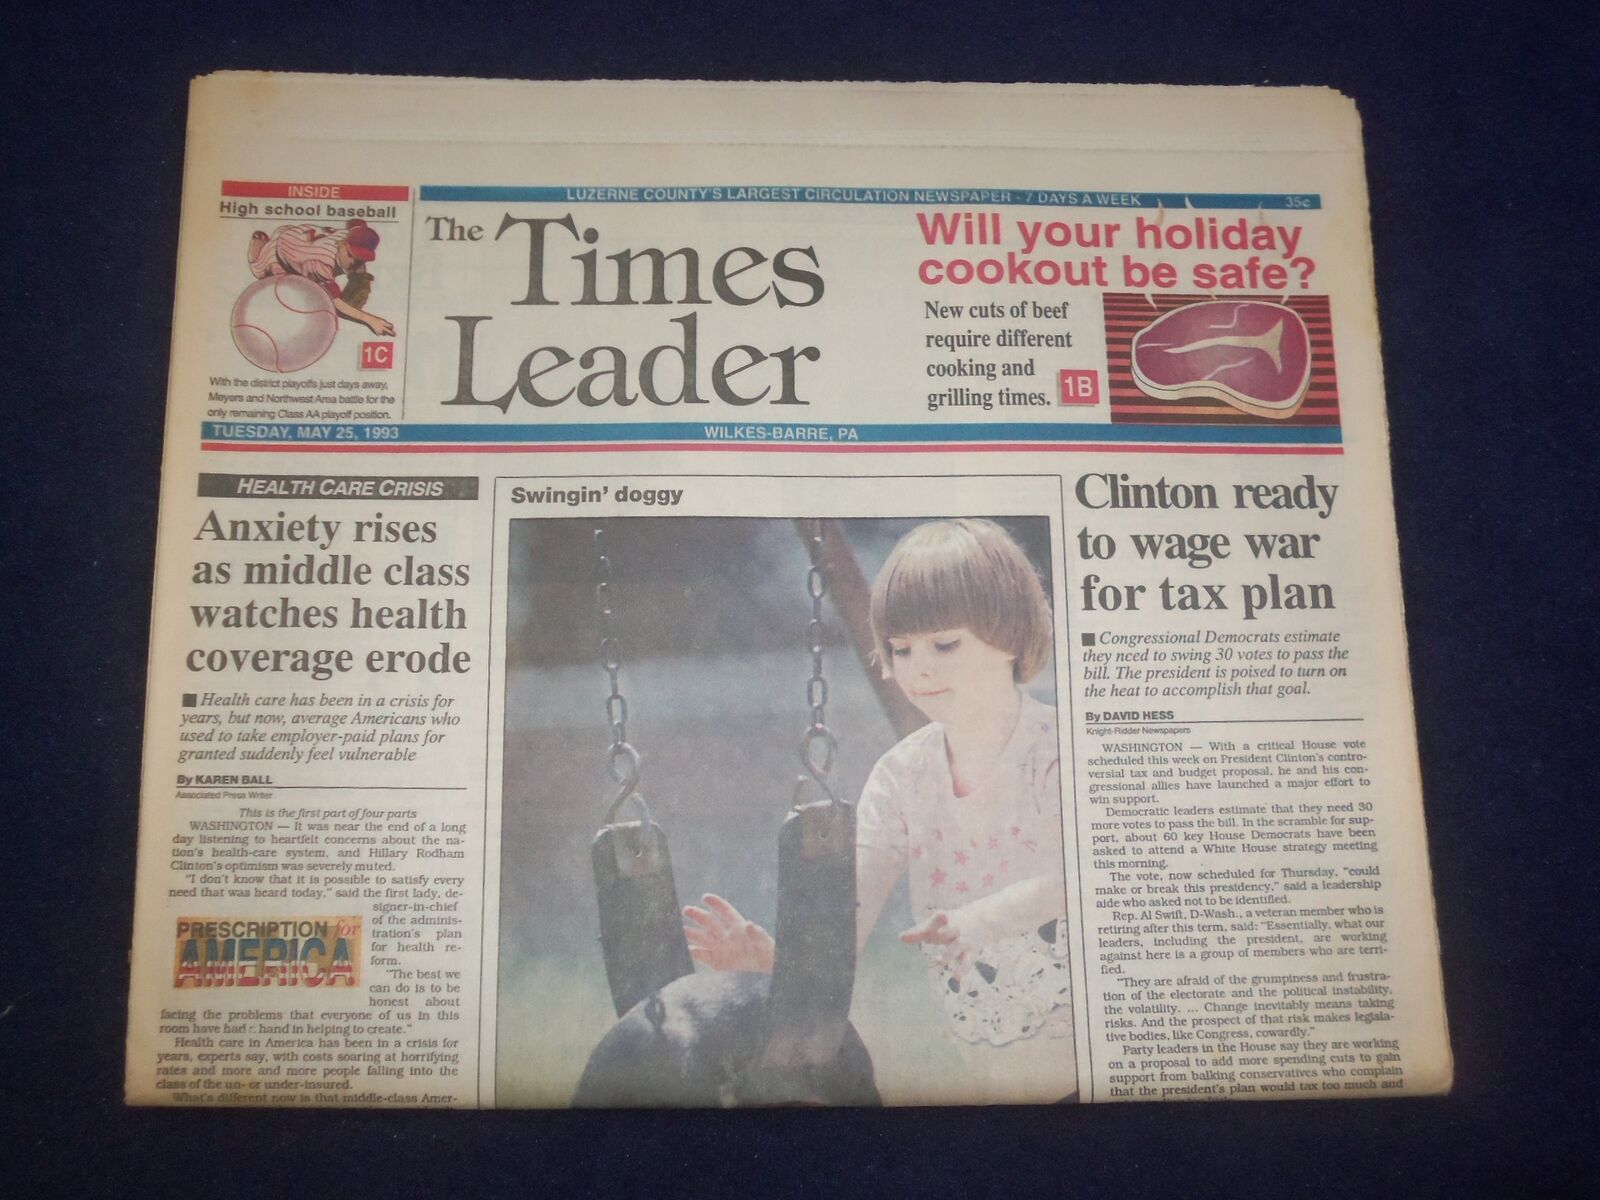 1993 MAY 25 WILKES-BARRE TIMES LEADER - CLINTON READY FOR TAX PLAN WAR - NP 8109